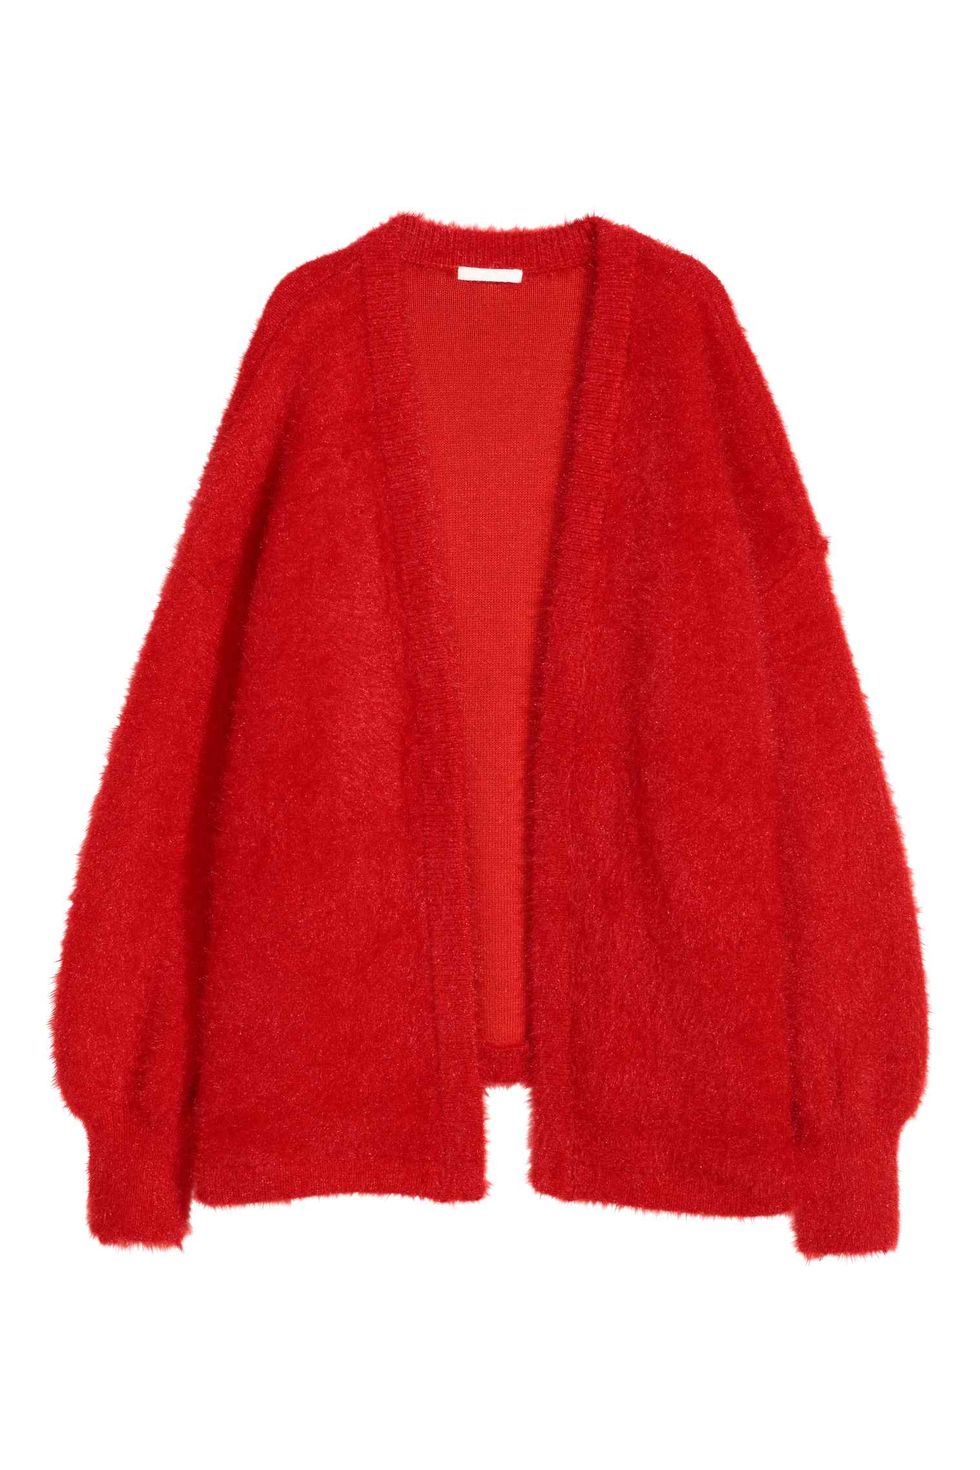 Clothing, Outerwear, Red, Sleeve, Sweater, Costume, Woolen, Cardigan, Cape, Fur, 